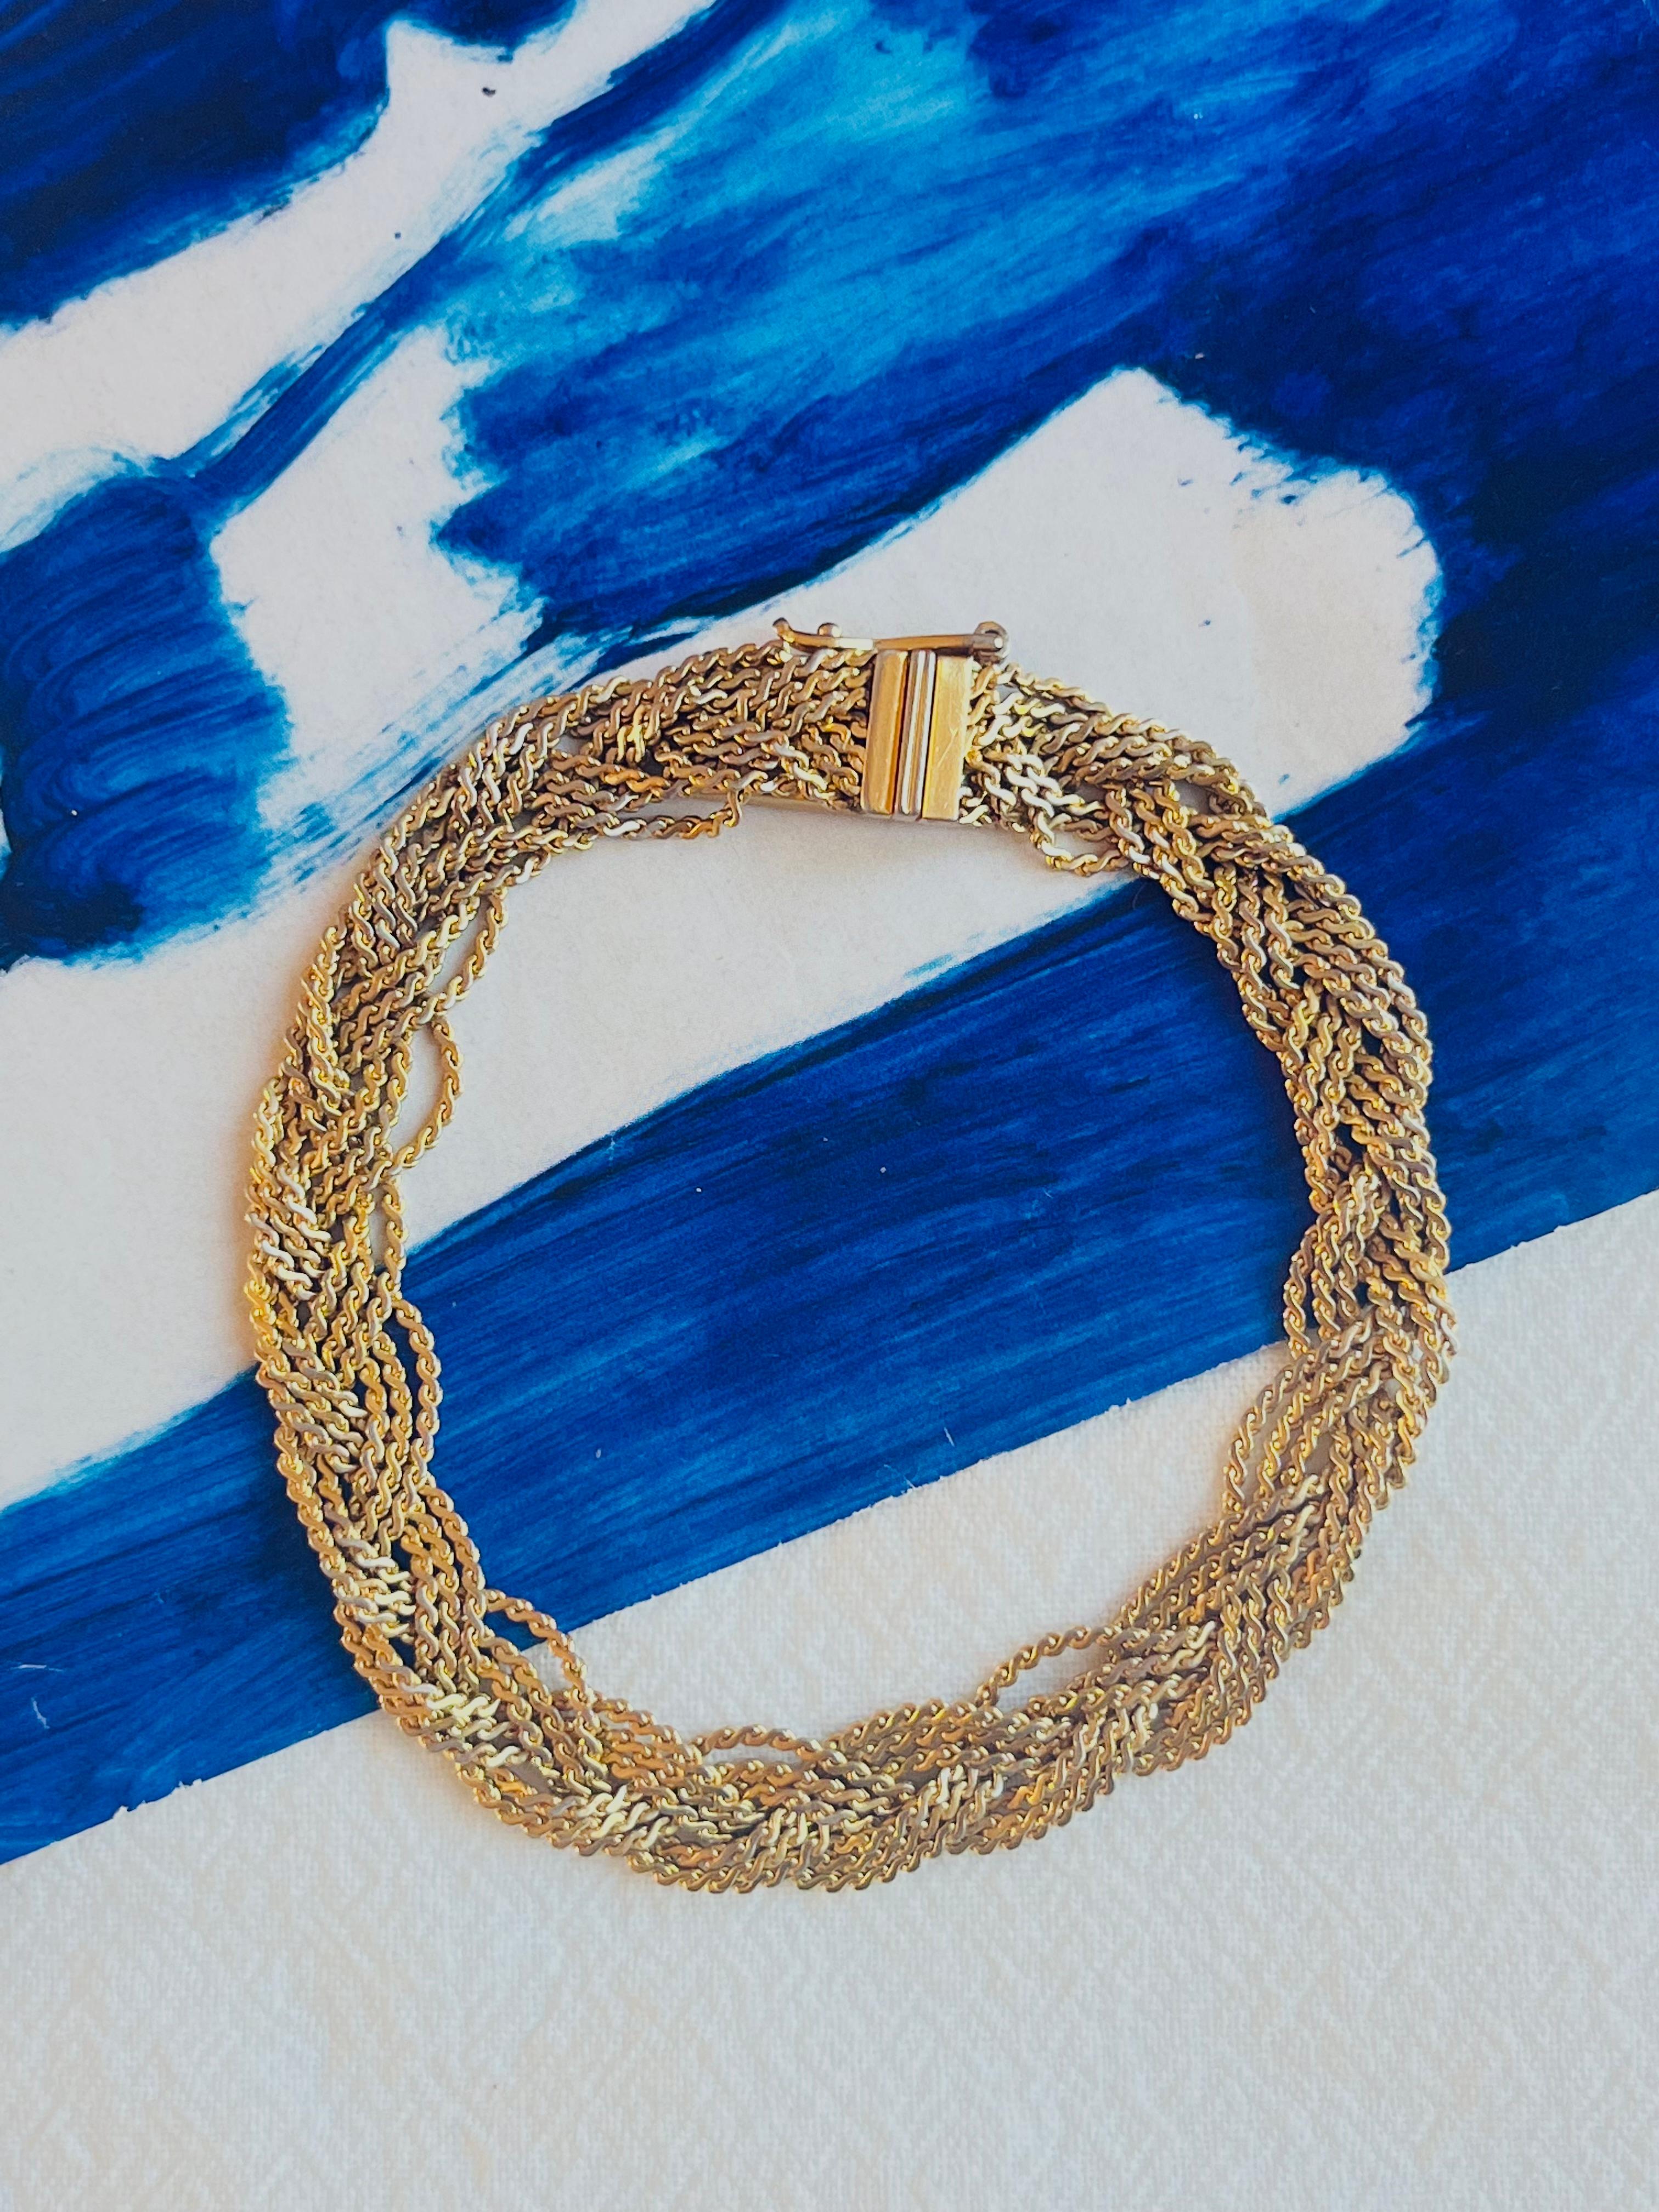 Christian Dior GROSSE 1963 Unisex Braided Woven Twisted 3 Triple Strands Rope Bracelet, Gold Tone

A very beautiful bracelet by GROSSE, signed at the back.

Very good condition. Some light scratches or colour loss. 100% Genuine.

Size: 19.5 *0.9